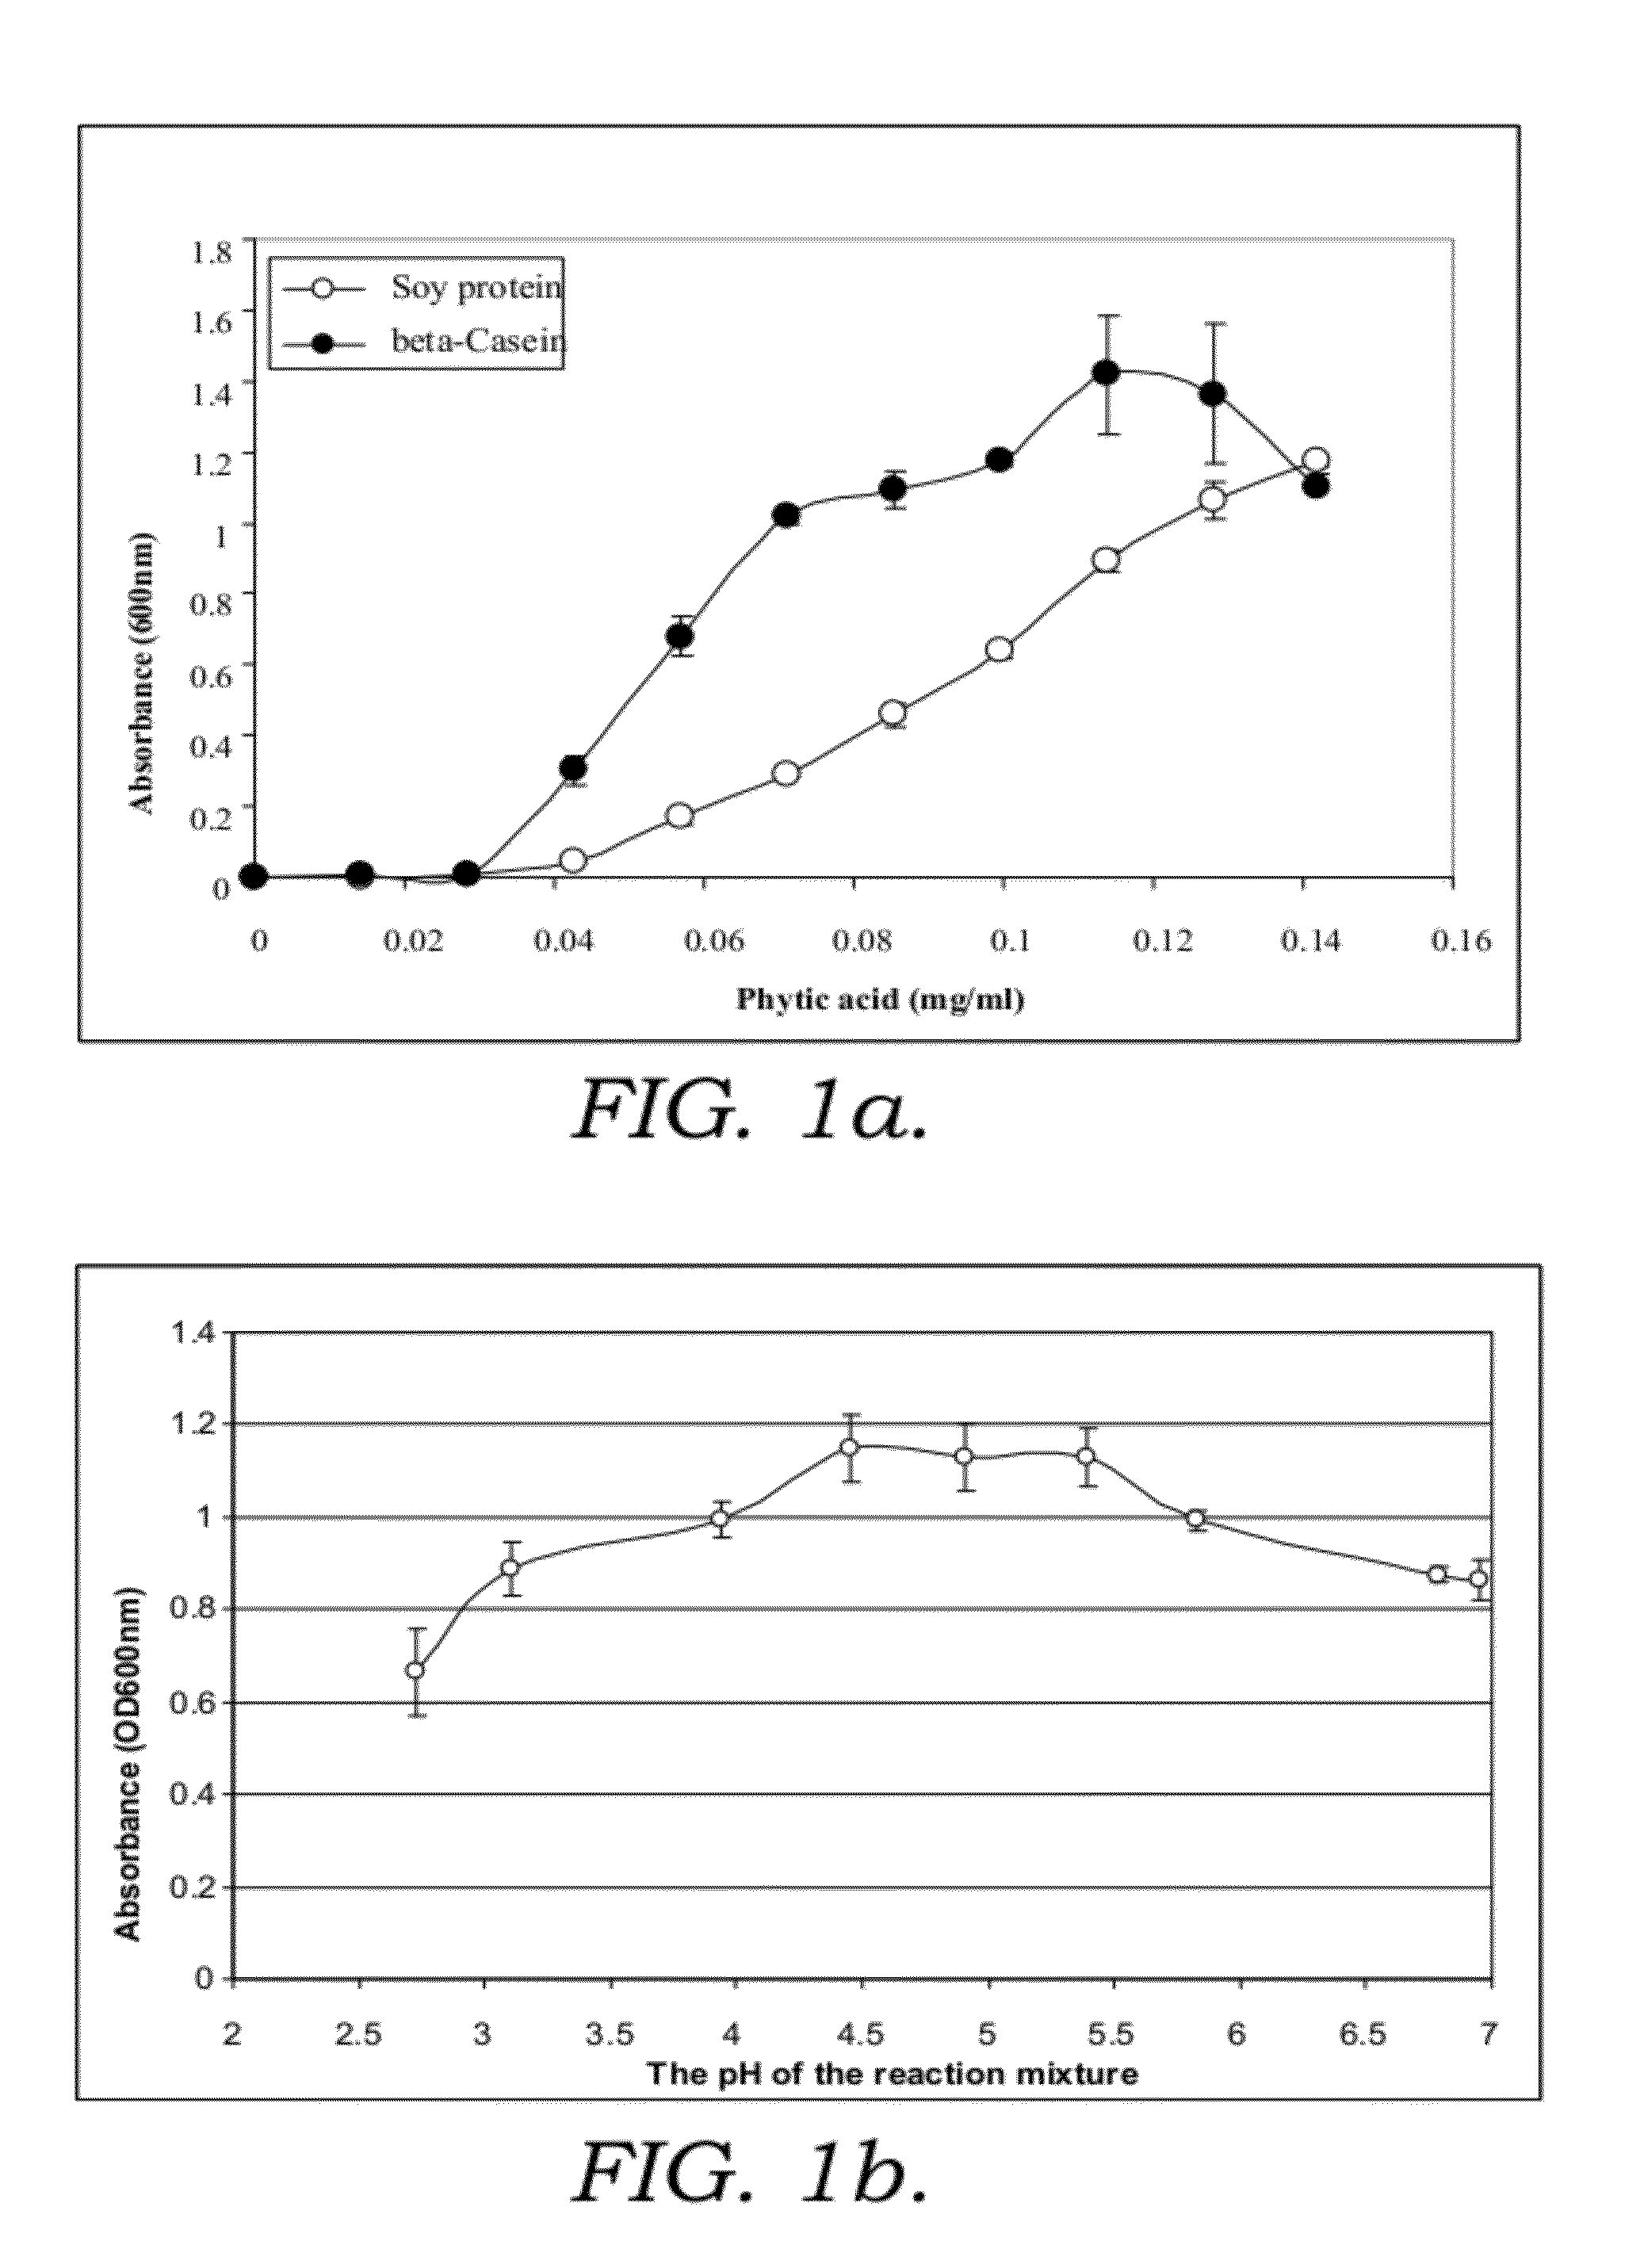 Method of detecting phytase activity or protease activity